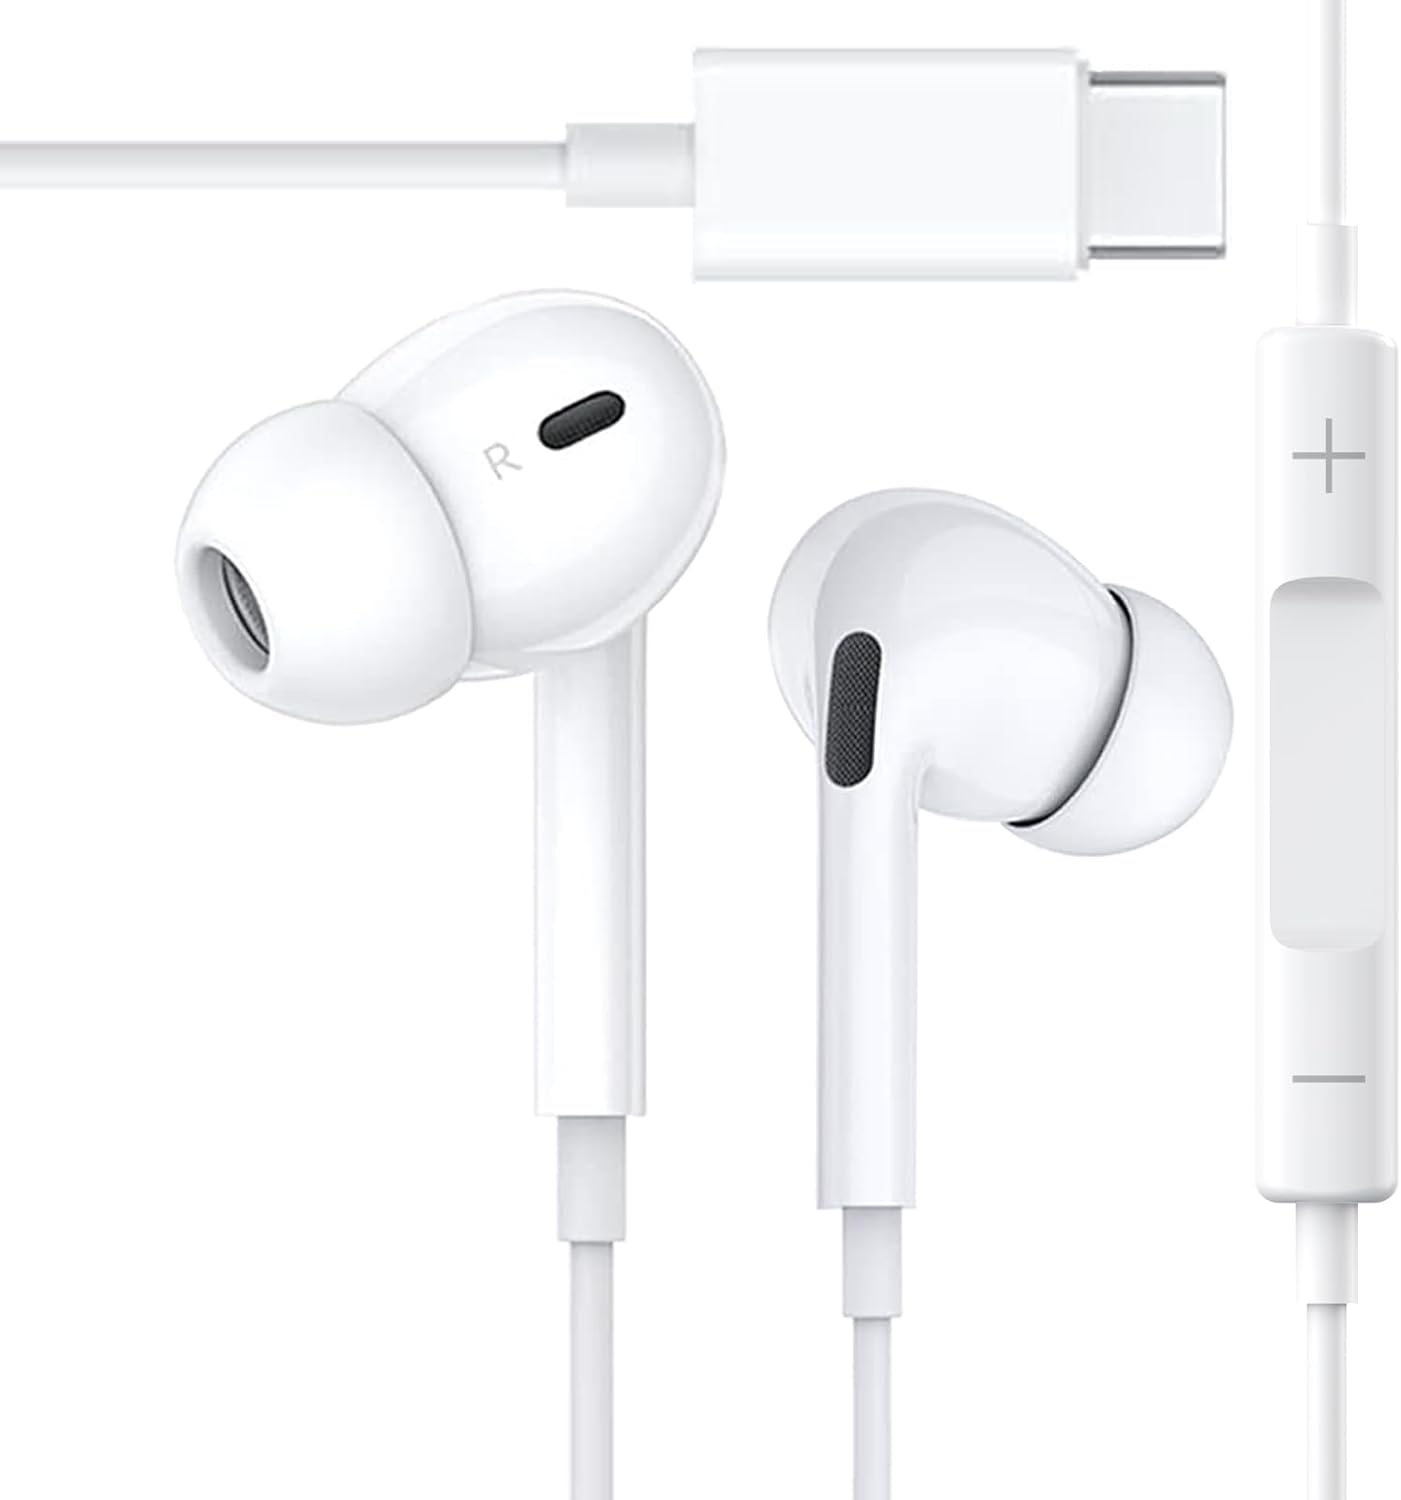 USB C Headphones Pack of 3, Type C Wired Earbuds, In-Ear Headphones with Microphone Noise Canceling Stereo, Earphones Compatible with iPhone 15/Samsung S23/Android/iPad Pro and Most USB C Devices - image 2 of 7